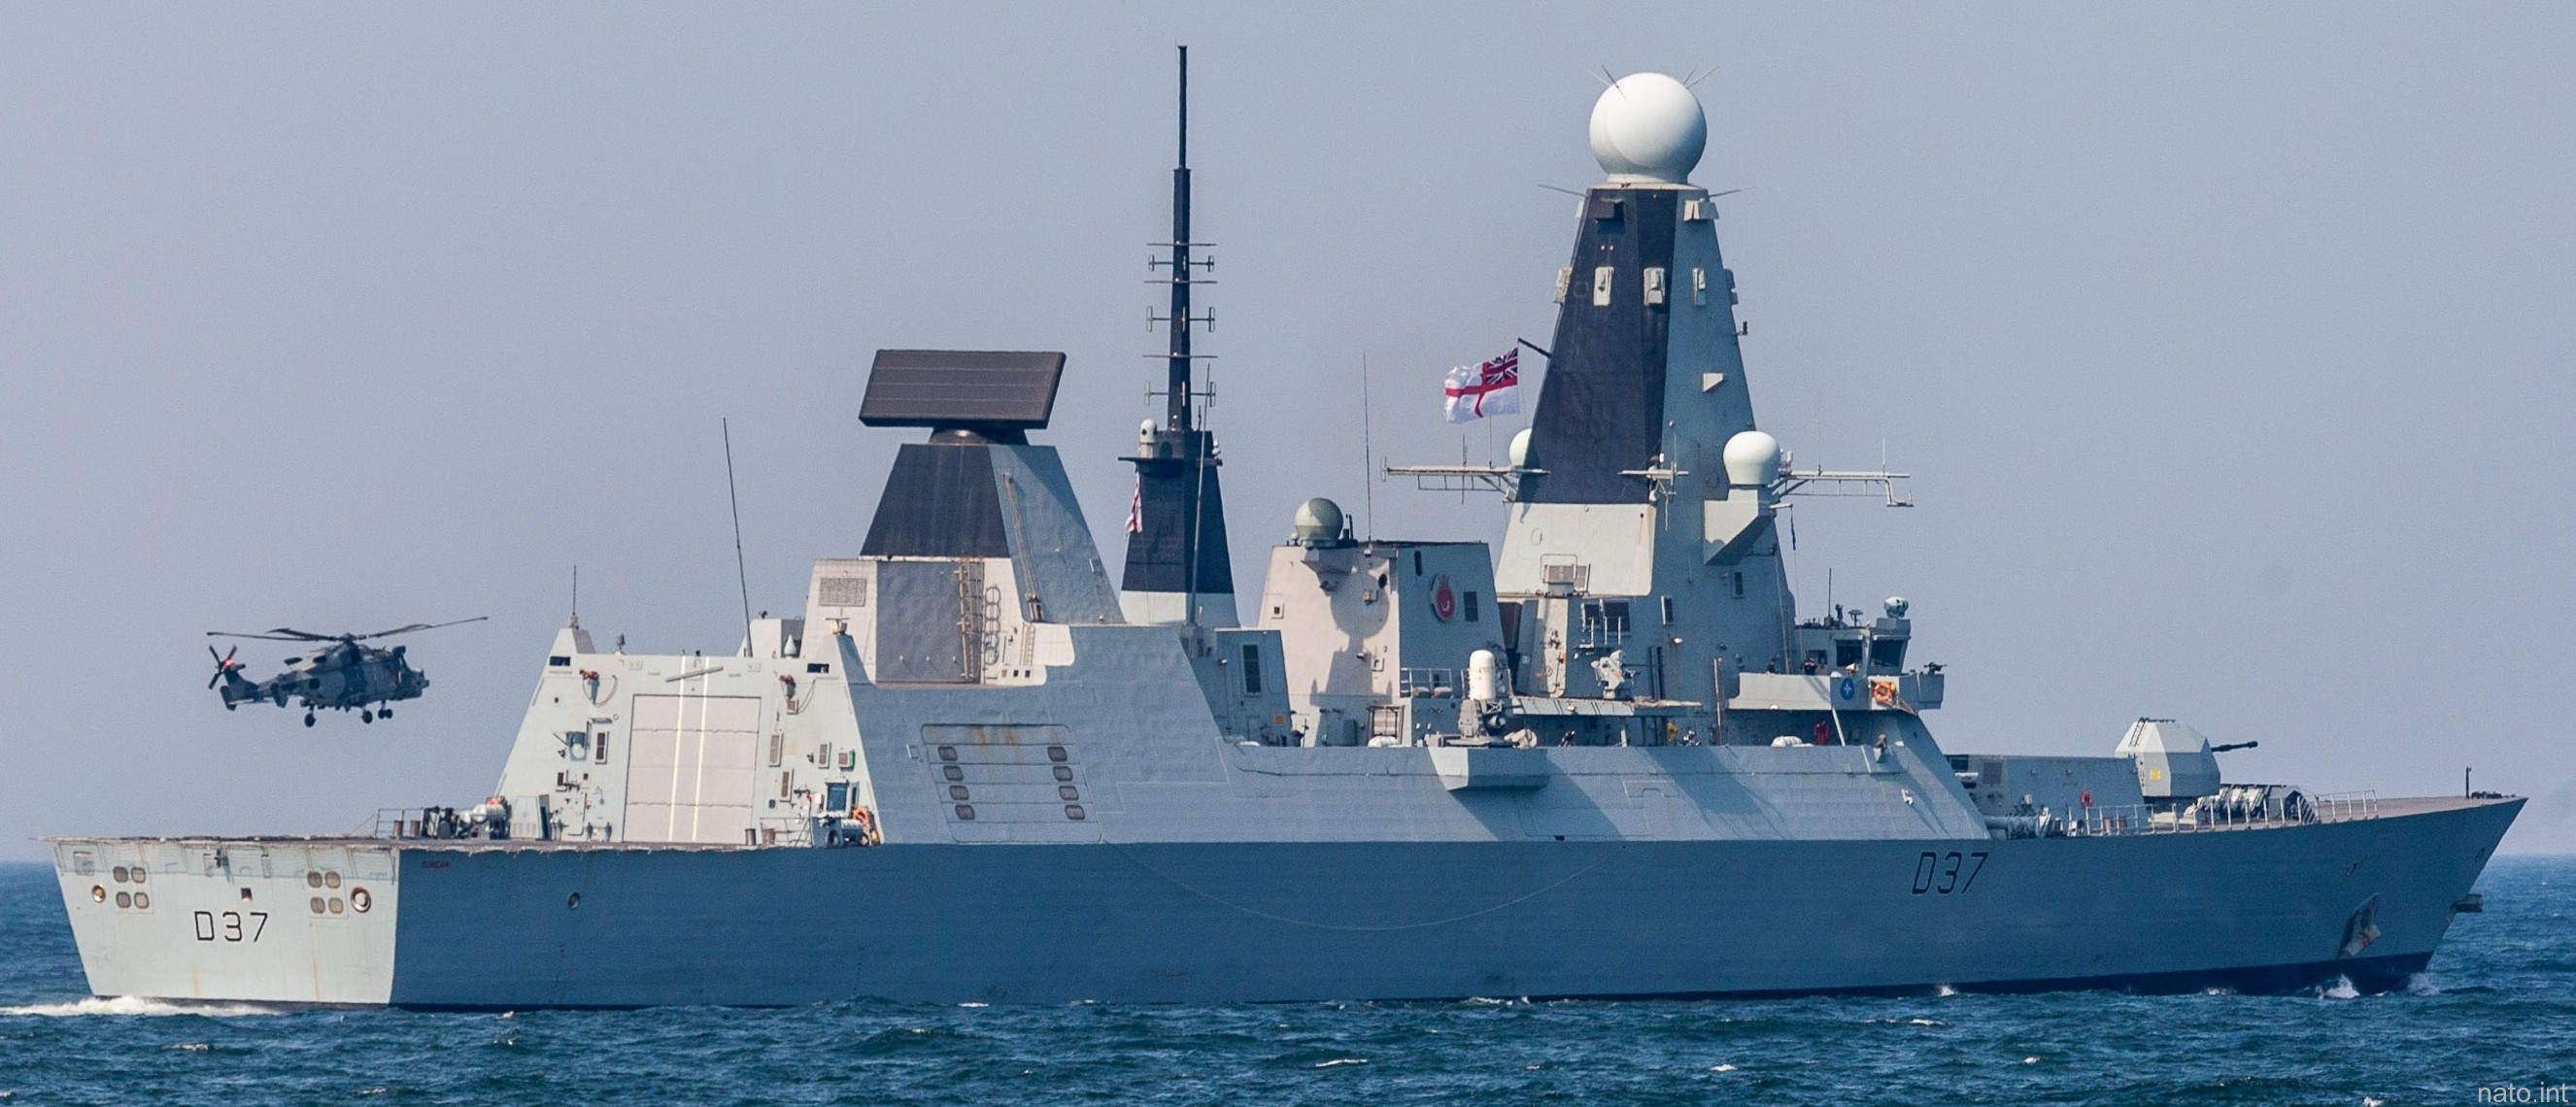 hms duncan d-37 type 45 daring class guided missile destroyer ddg royal navy sea viper paams 36 wildcat helicopter